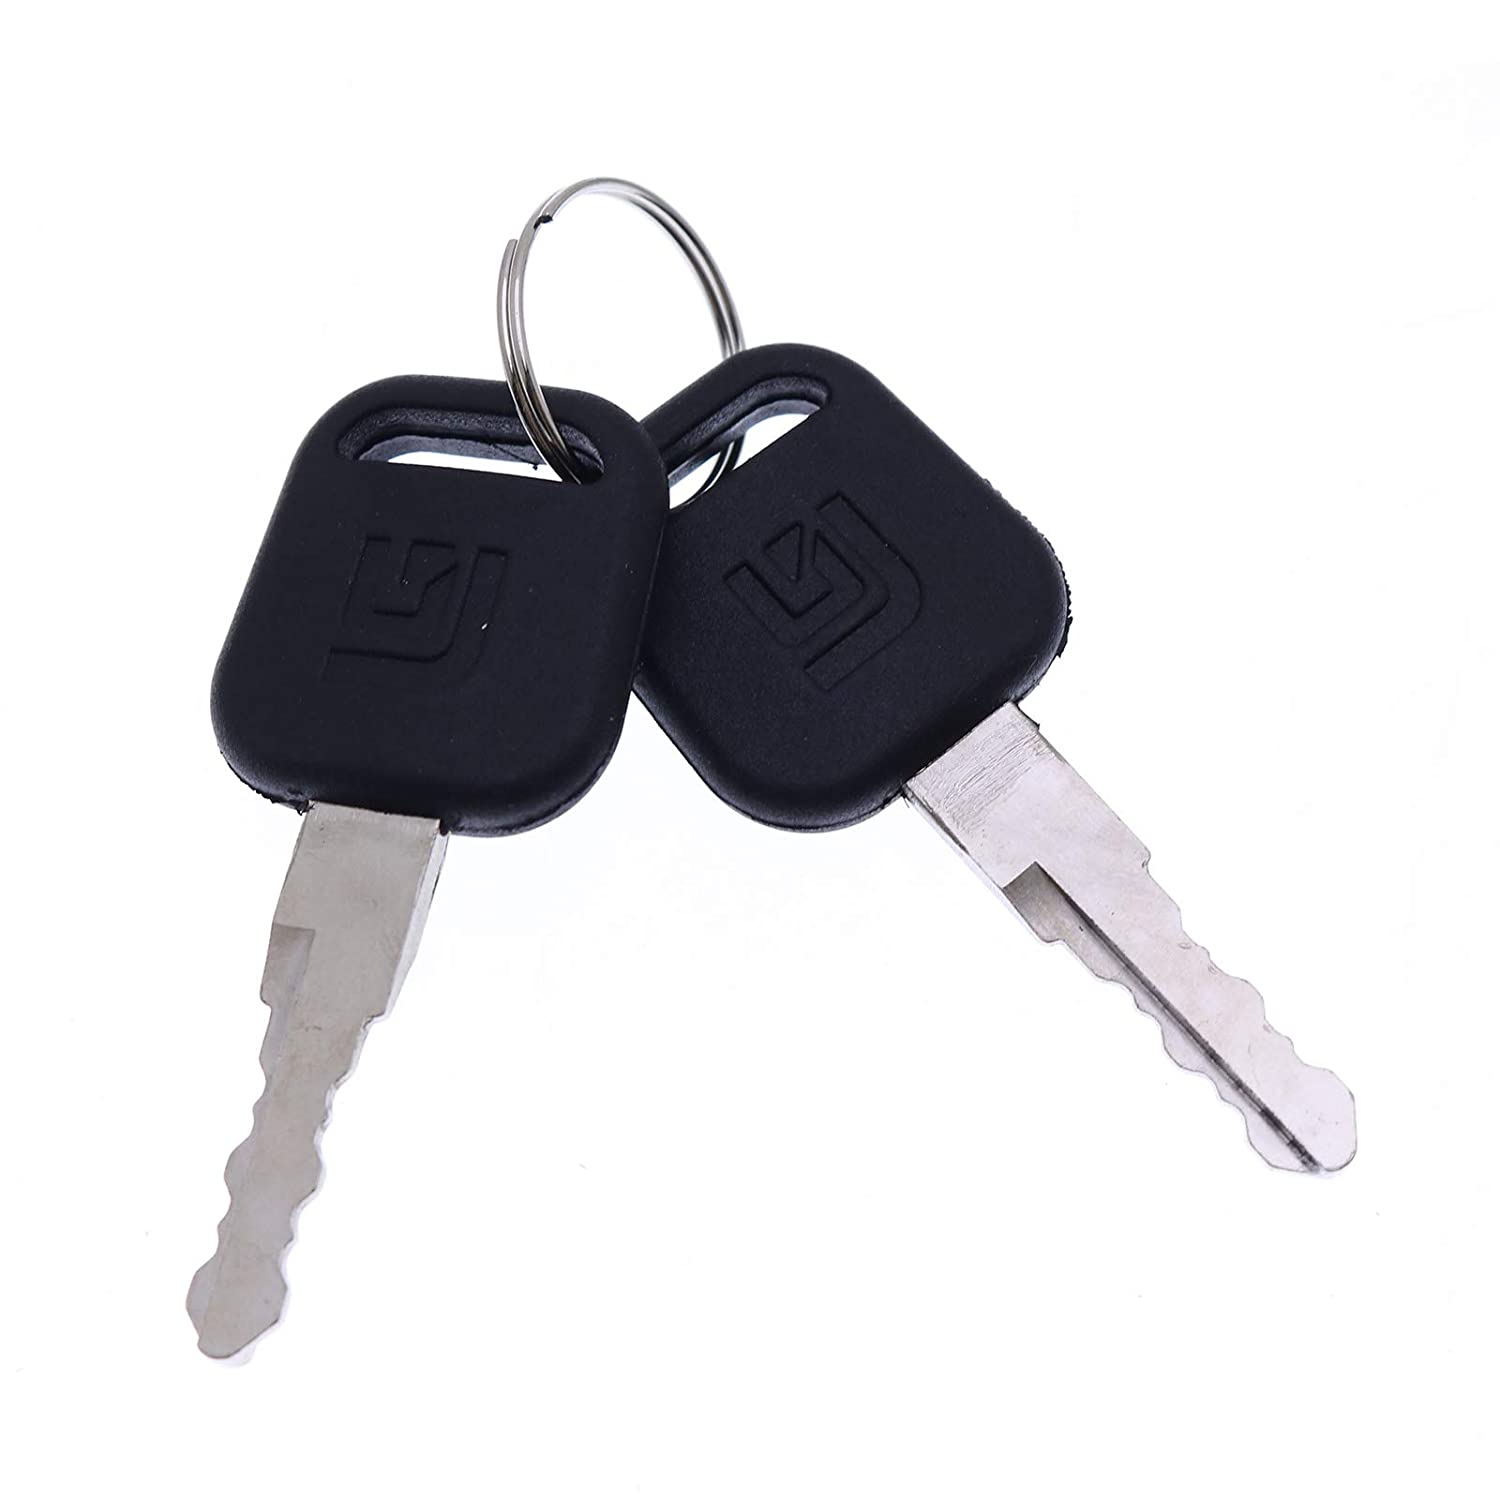 Ignition Keys 34B0557 for Liugong Excavator and Heavy Equipment (6) - KUDUPARTS